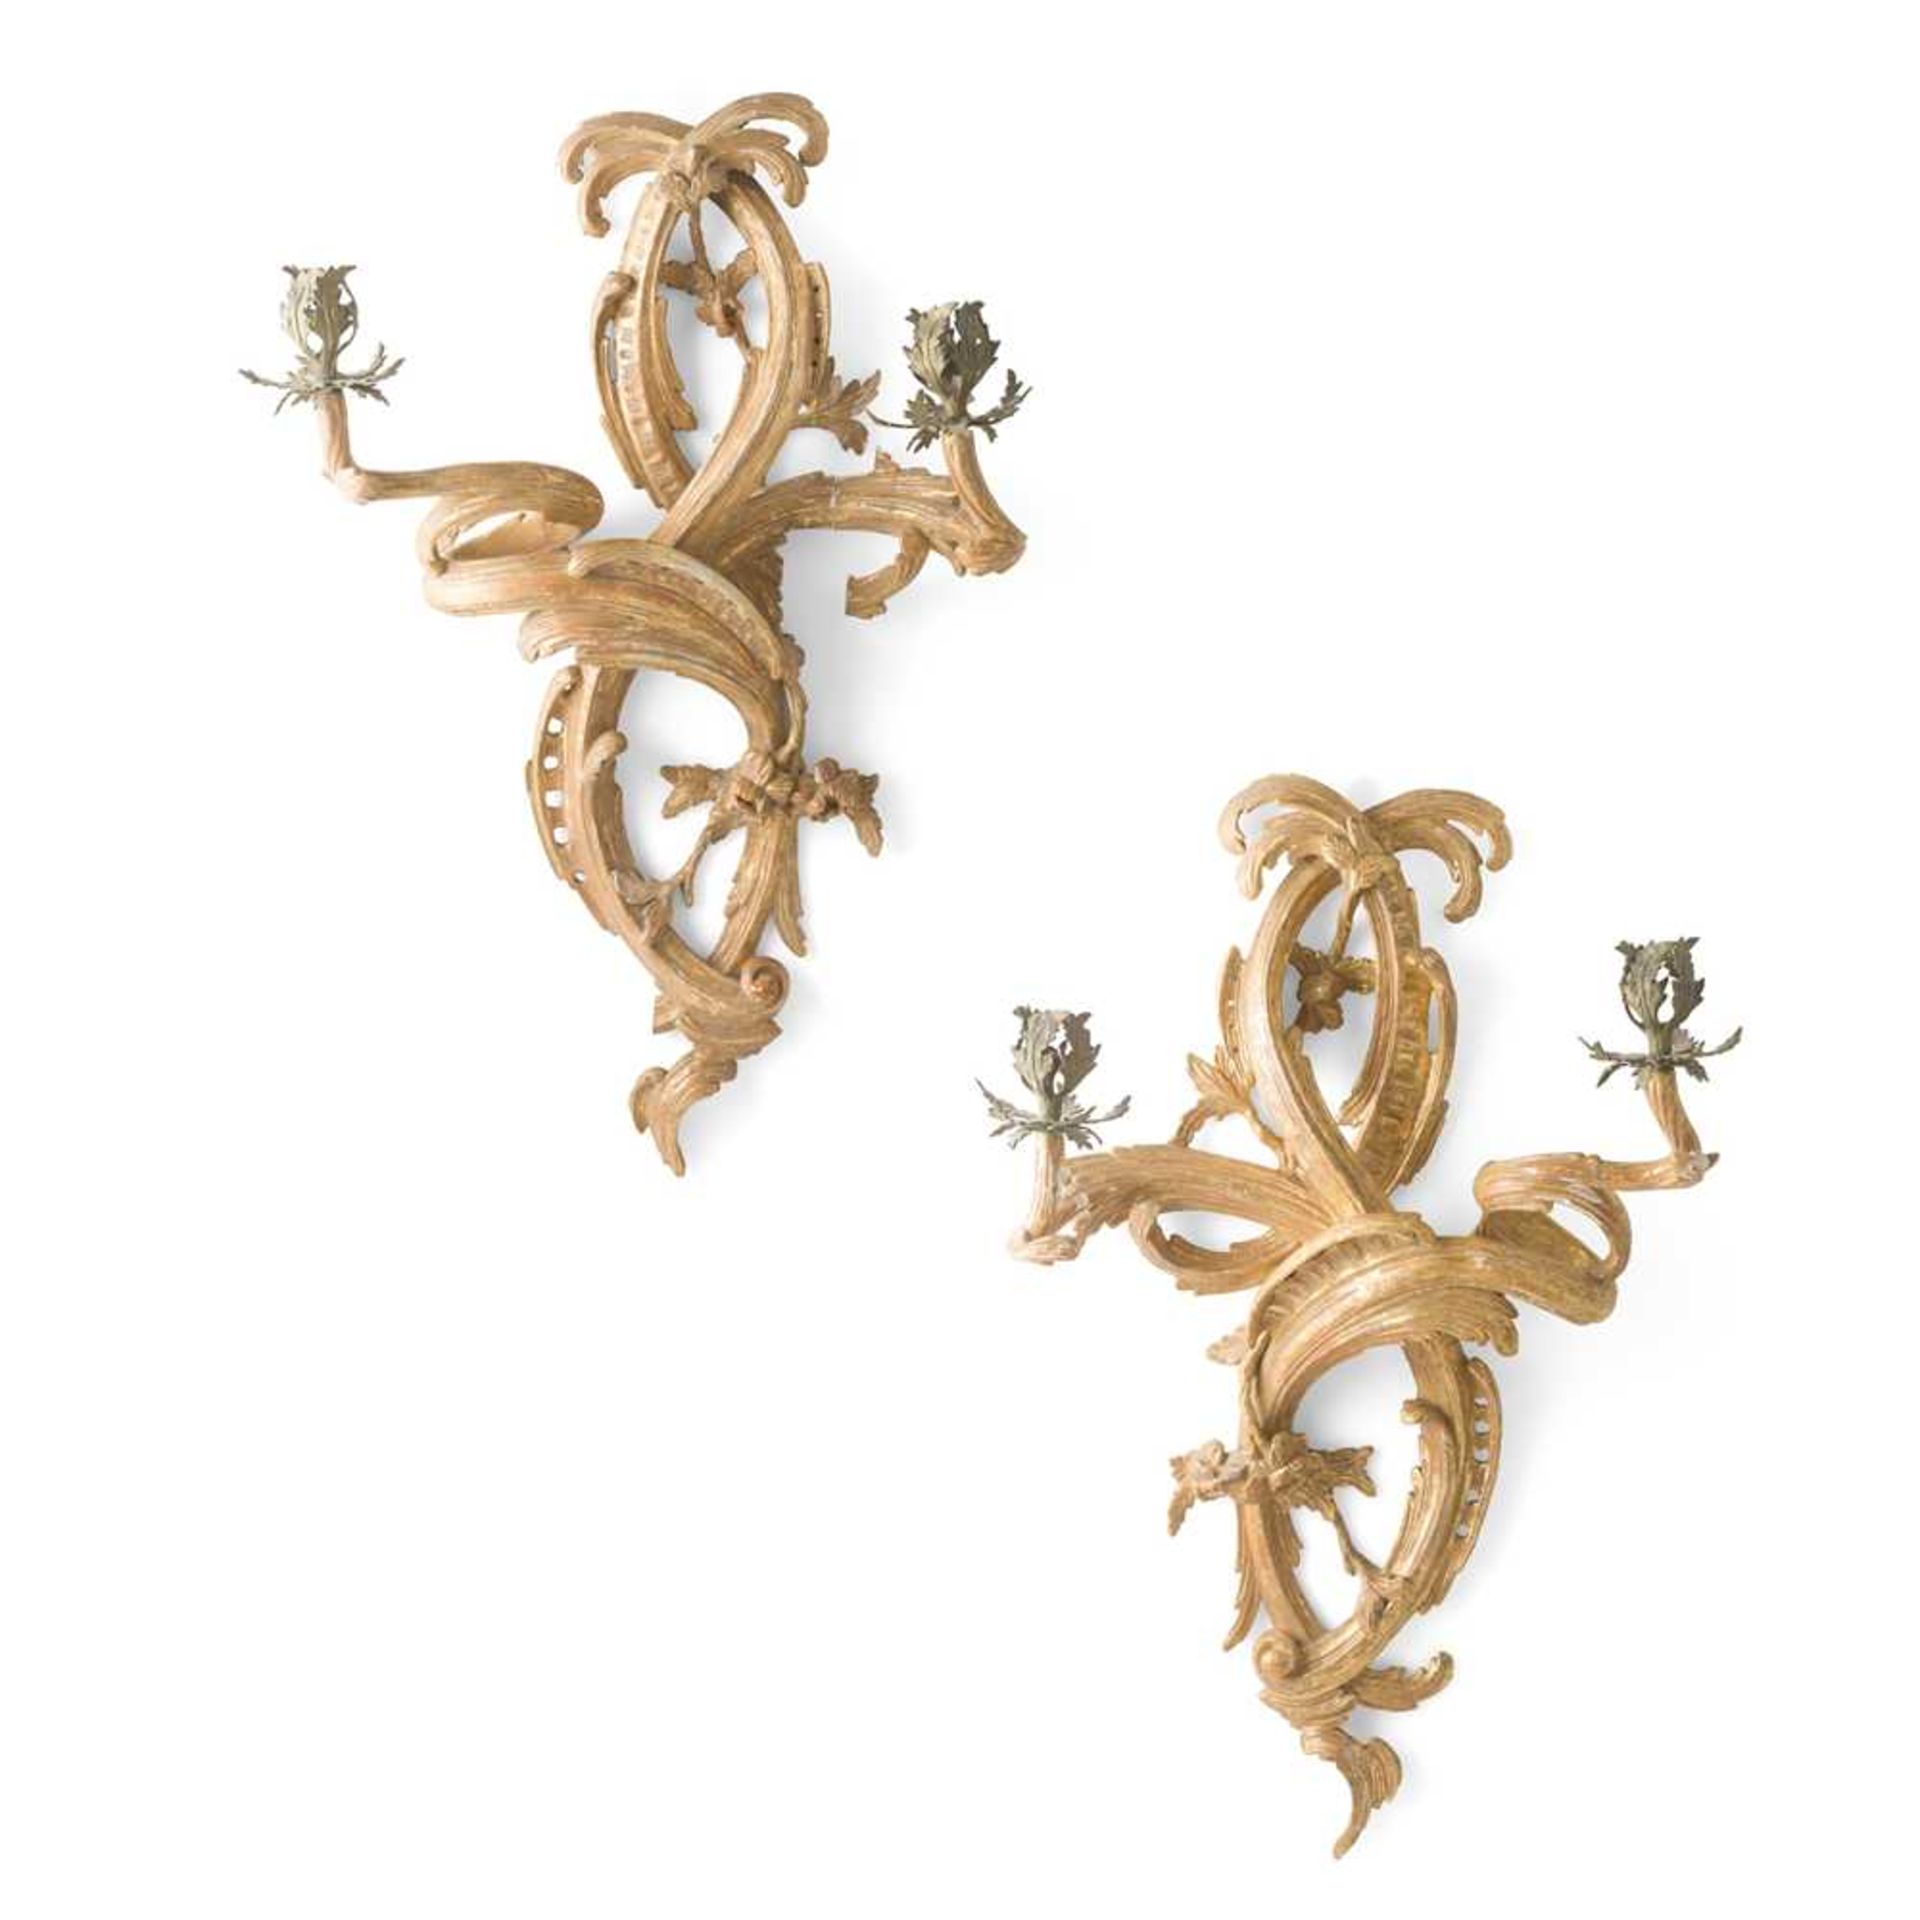 PAIR OF GEORGE III GILTWOOD WALL SCONCES 18TH CENTURY